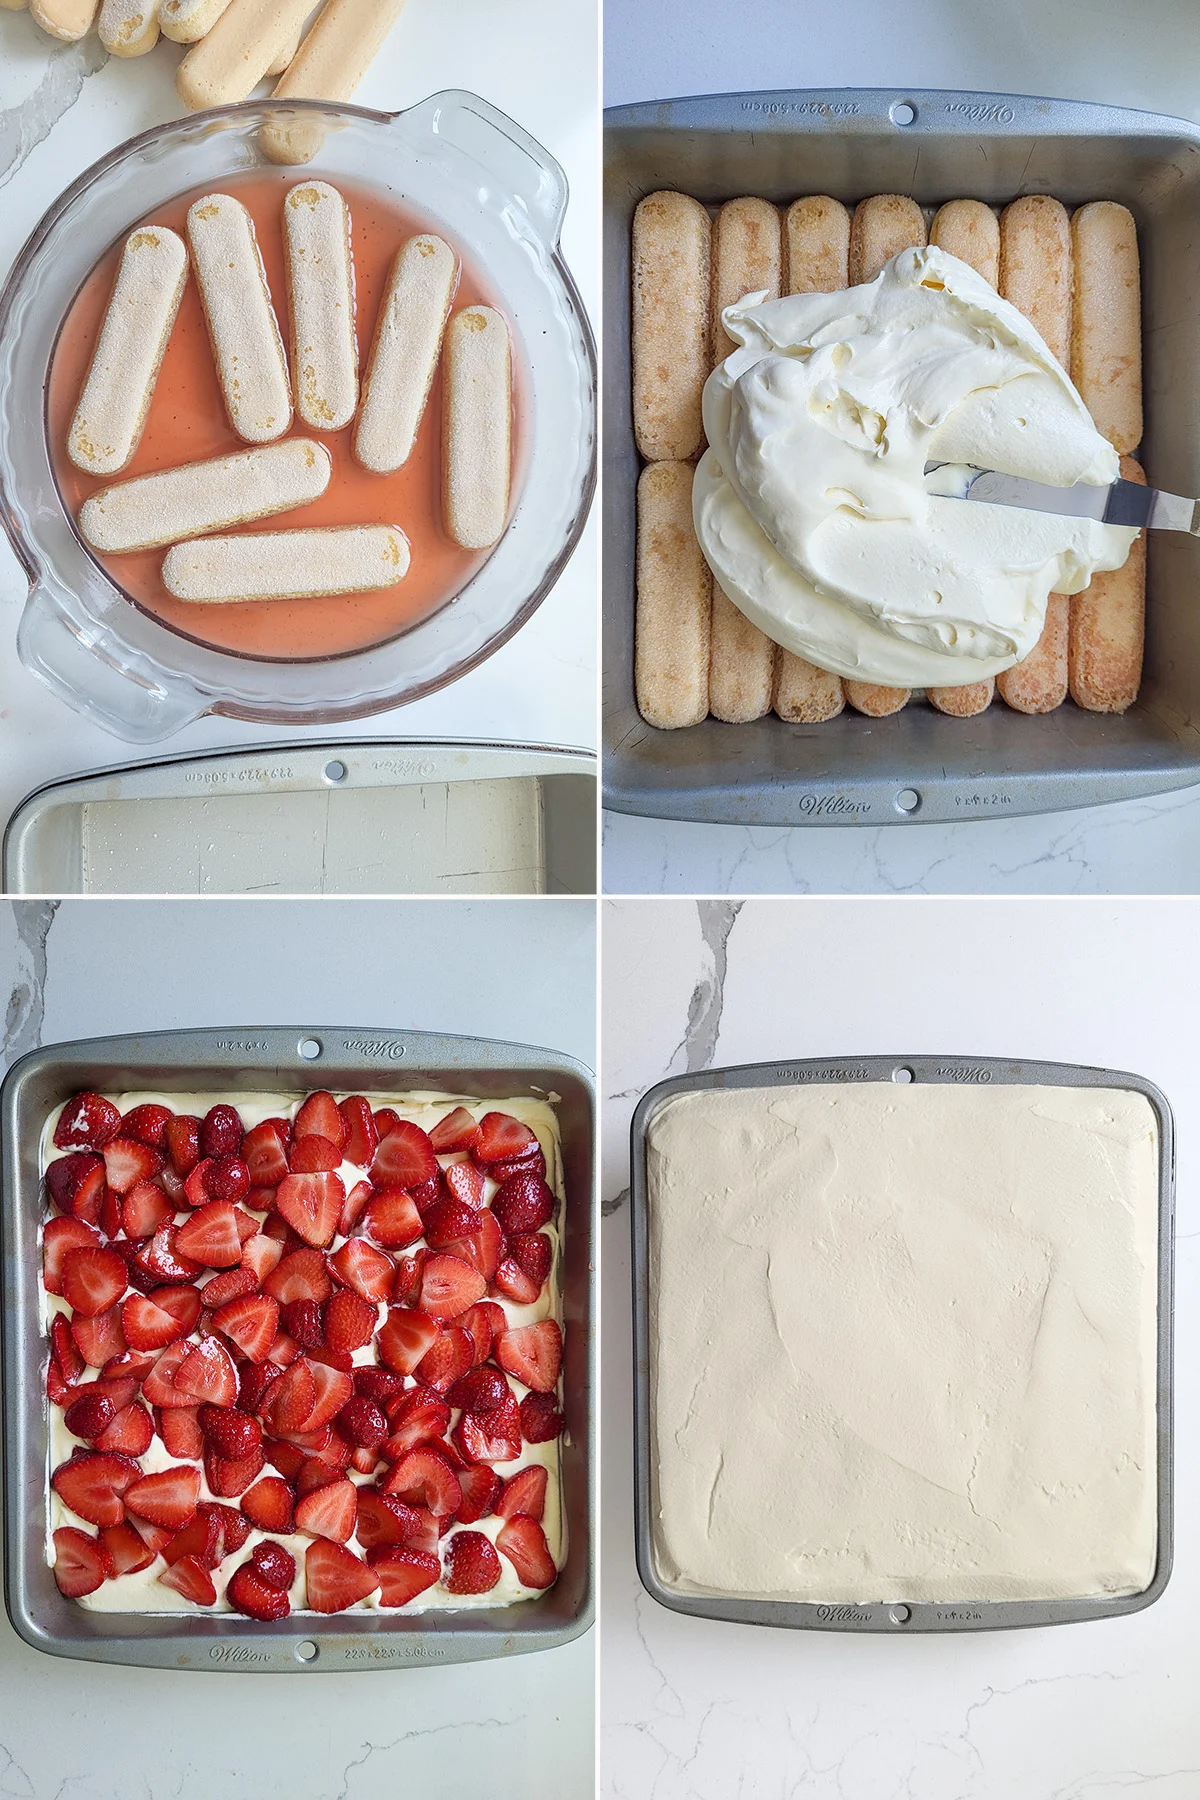 Lady fingers soaking in syrup. Spreading cream on a pan of lady fingers. Strawberries on cream.